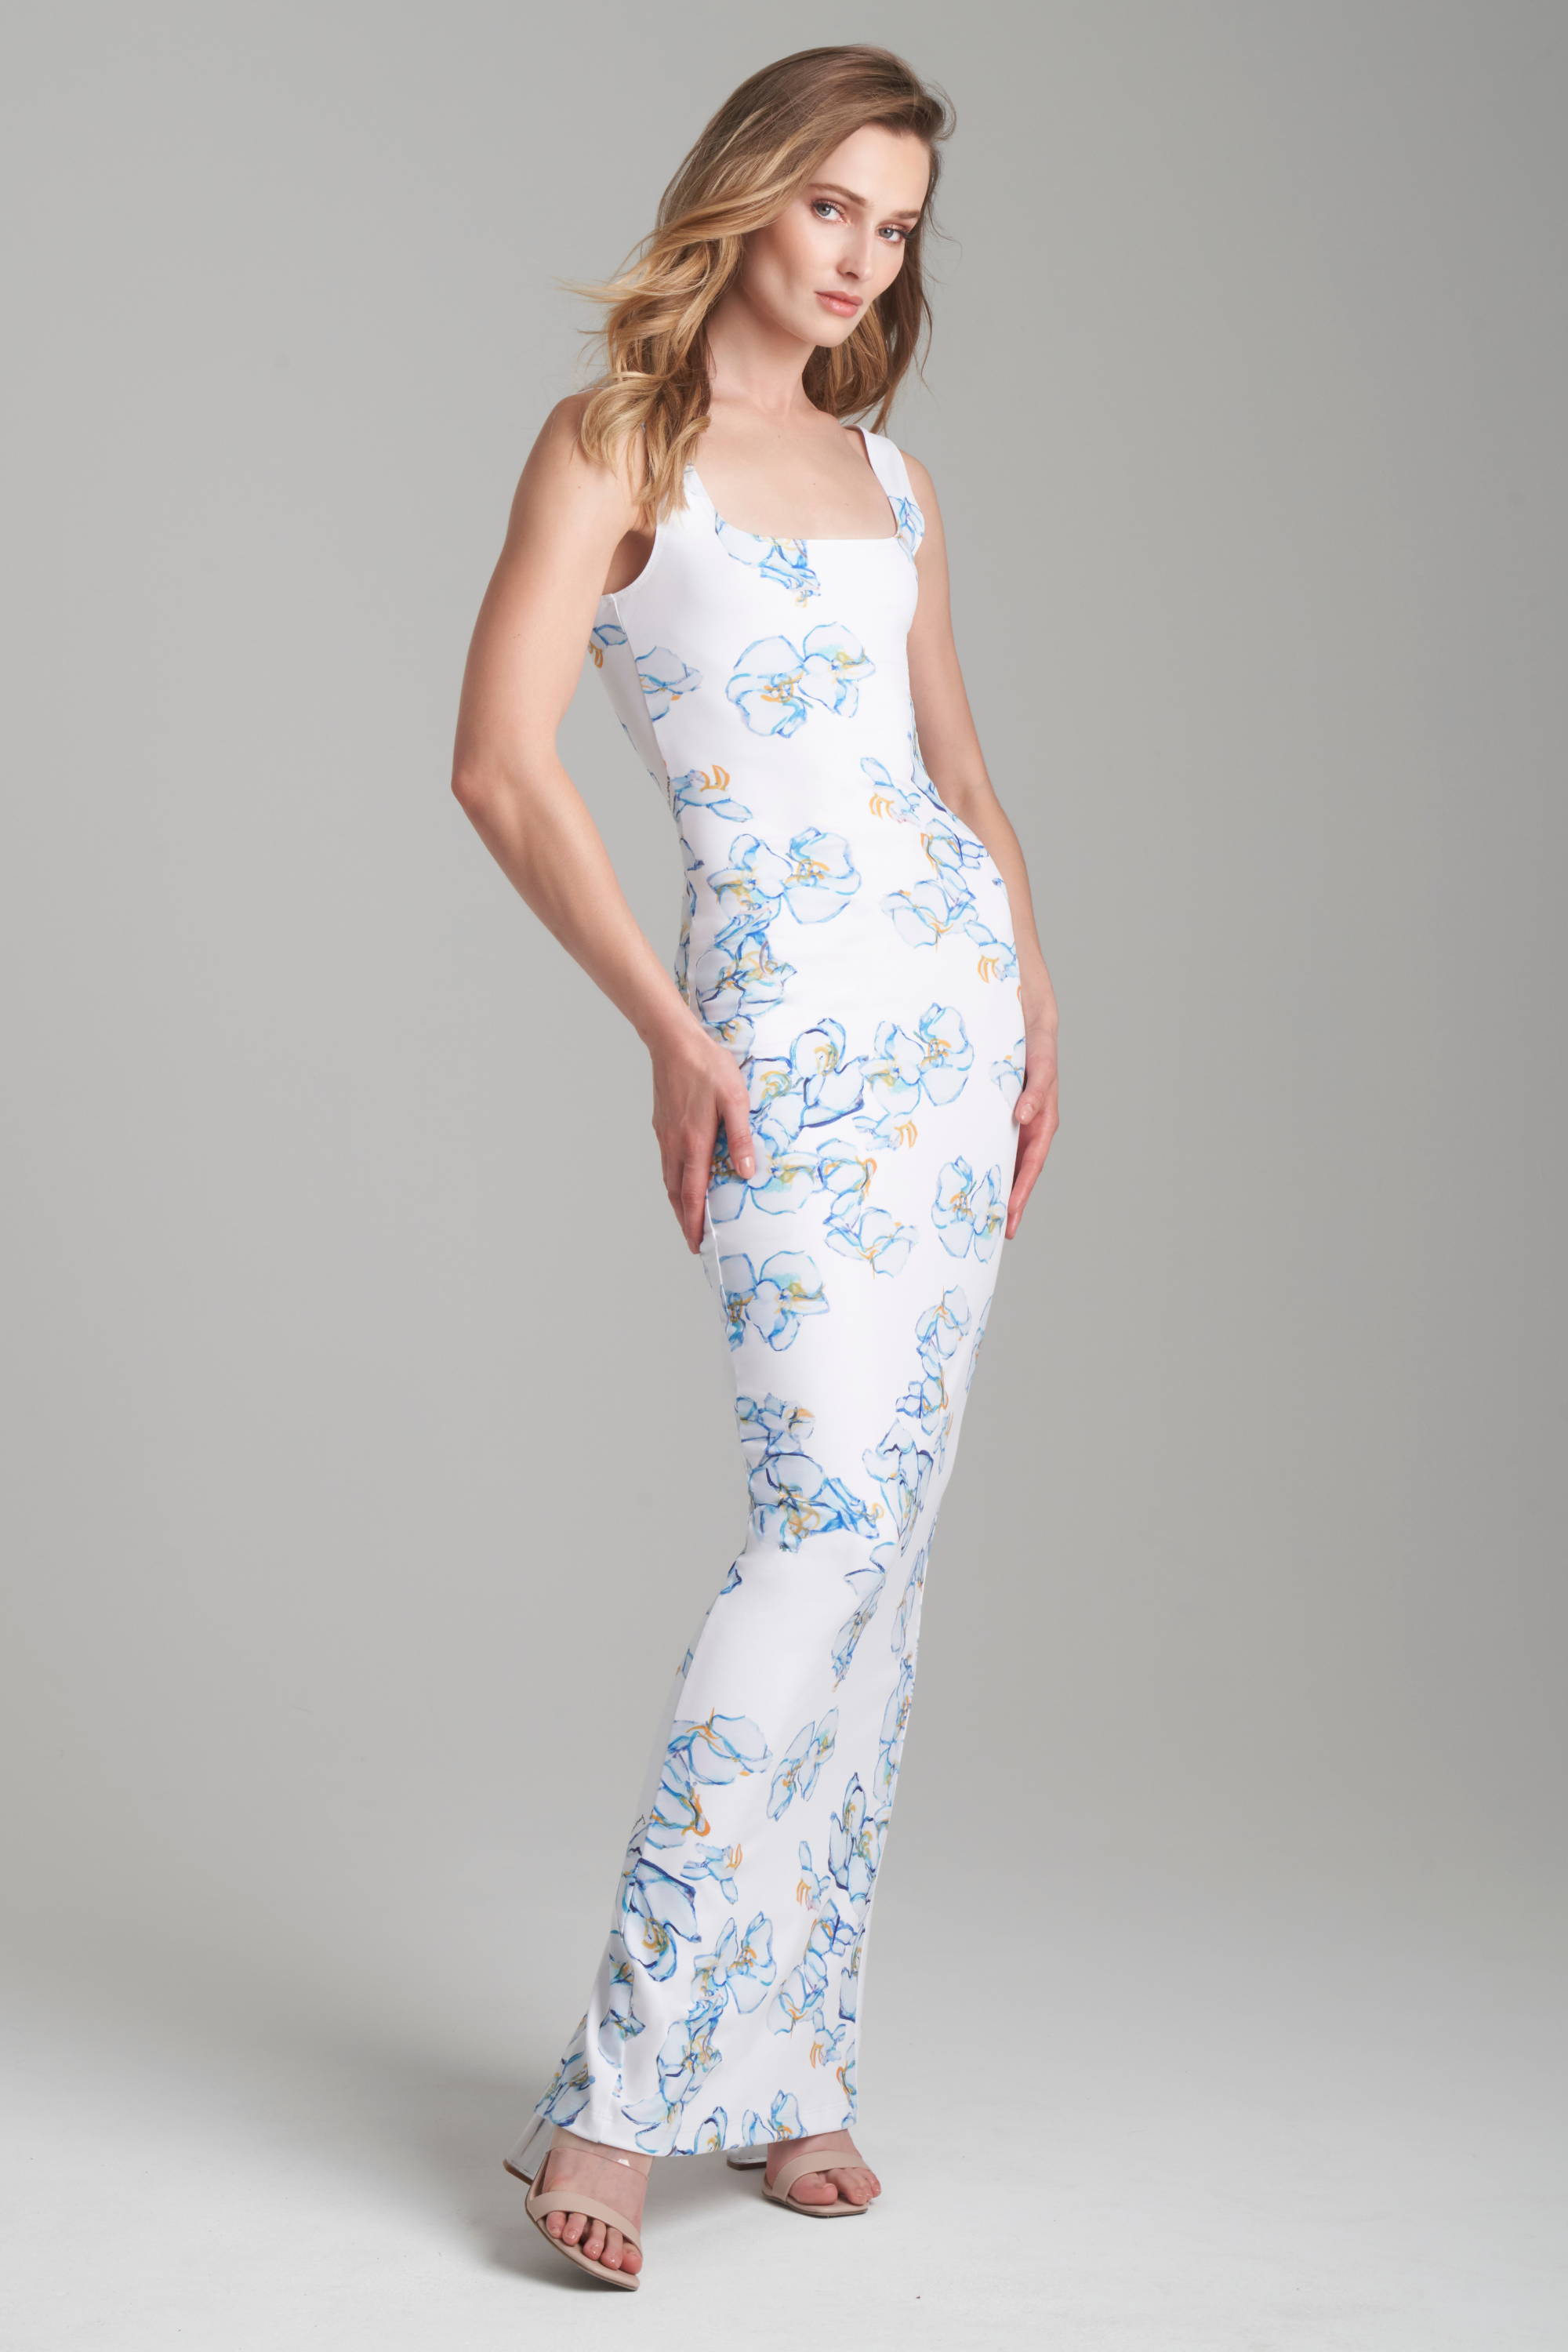 Woman wearing long orchid printed white and blue stretch knit dress by Ala von Auersperg for spring 2024